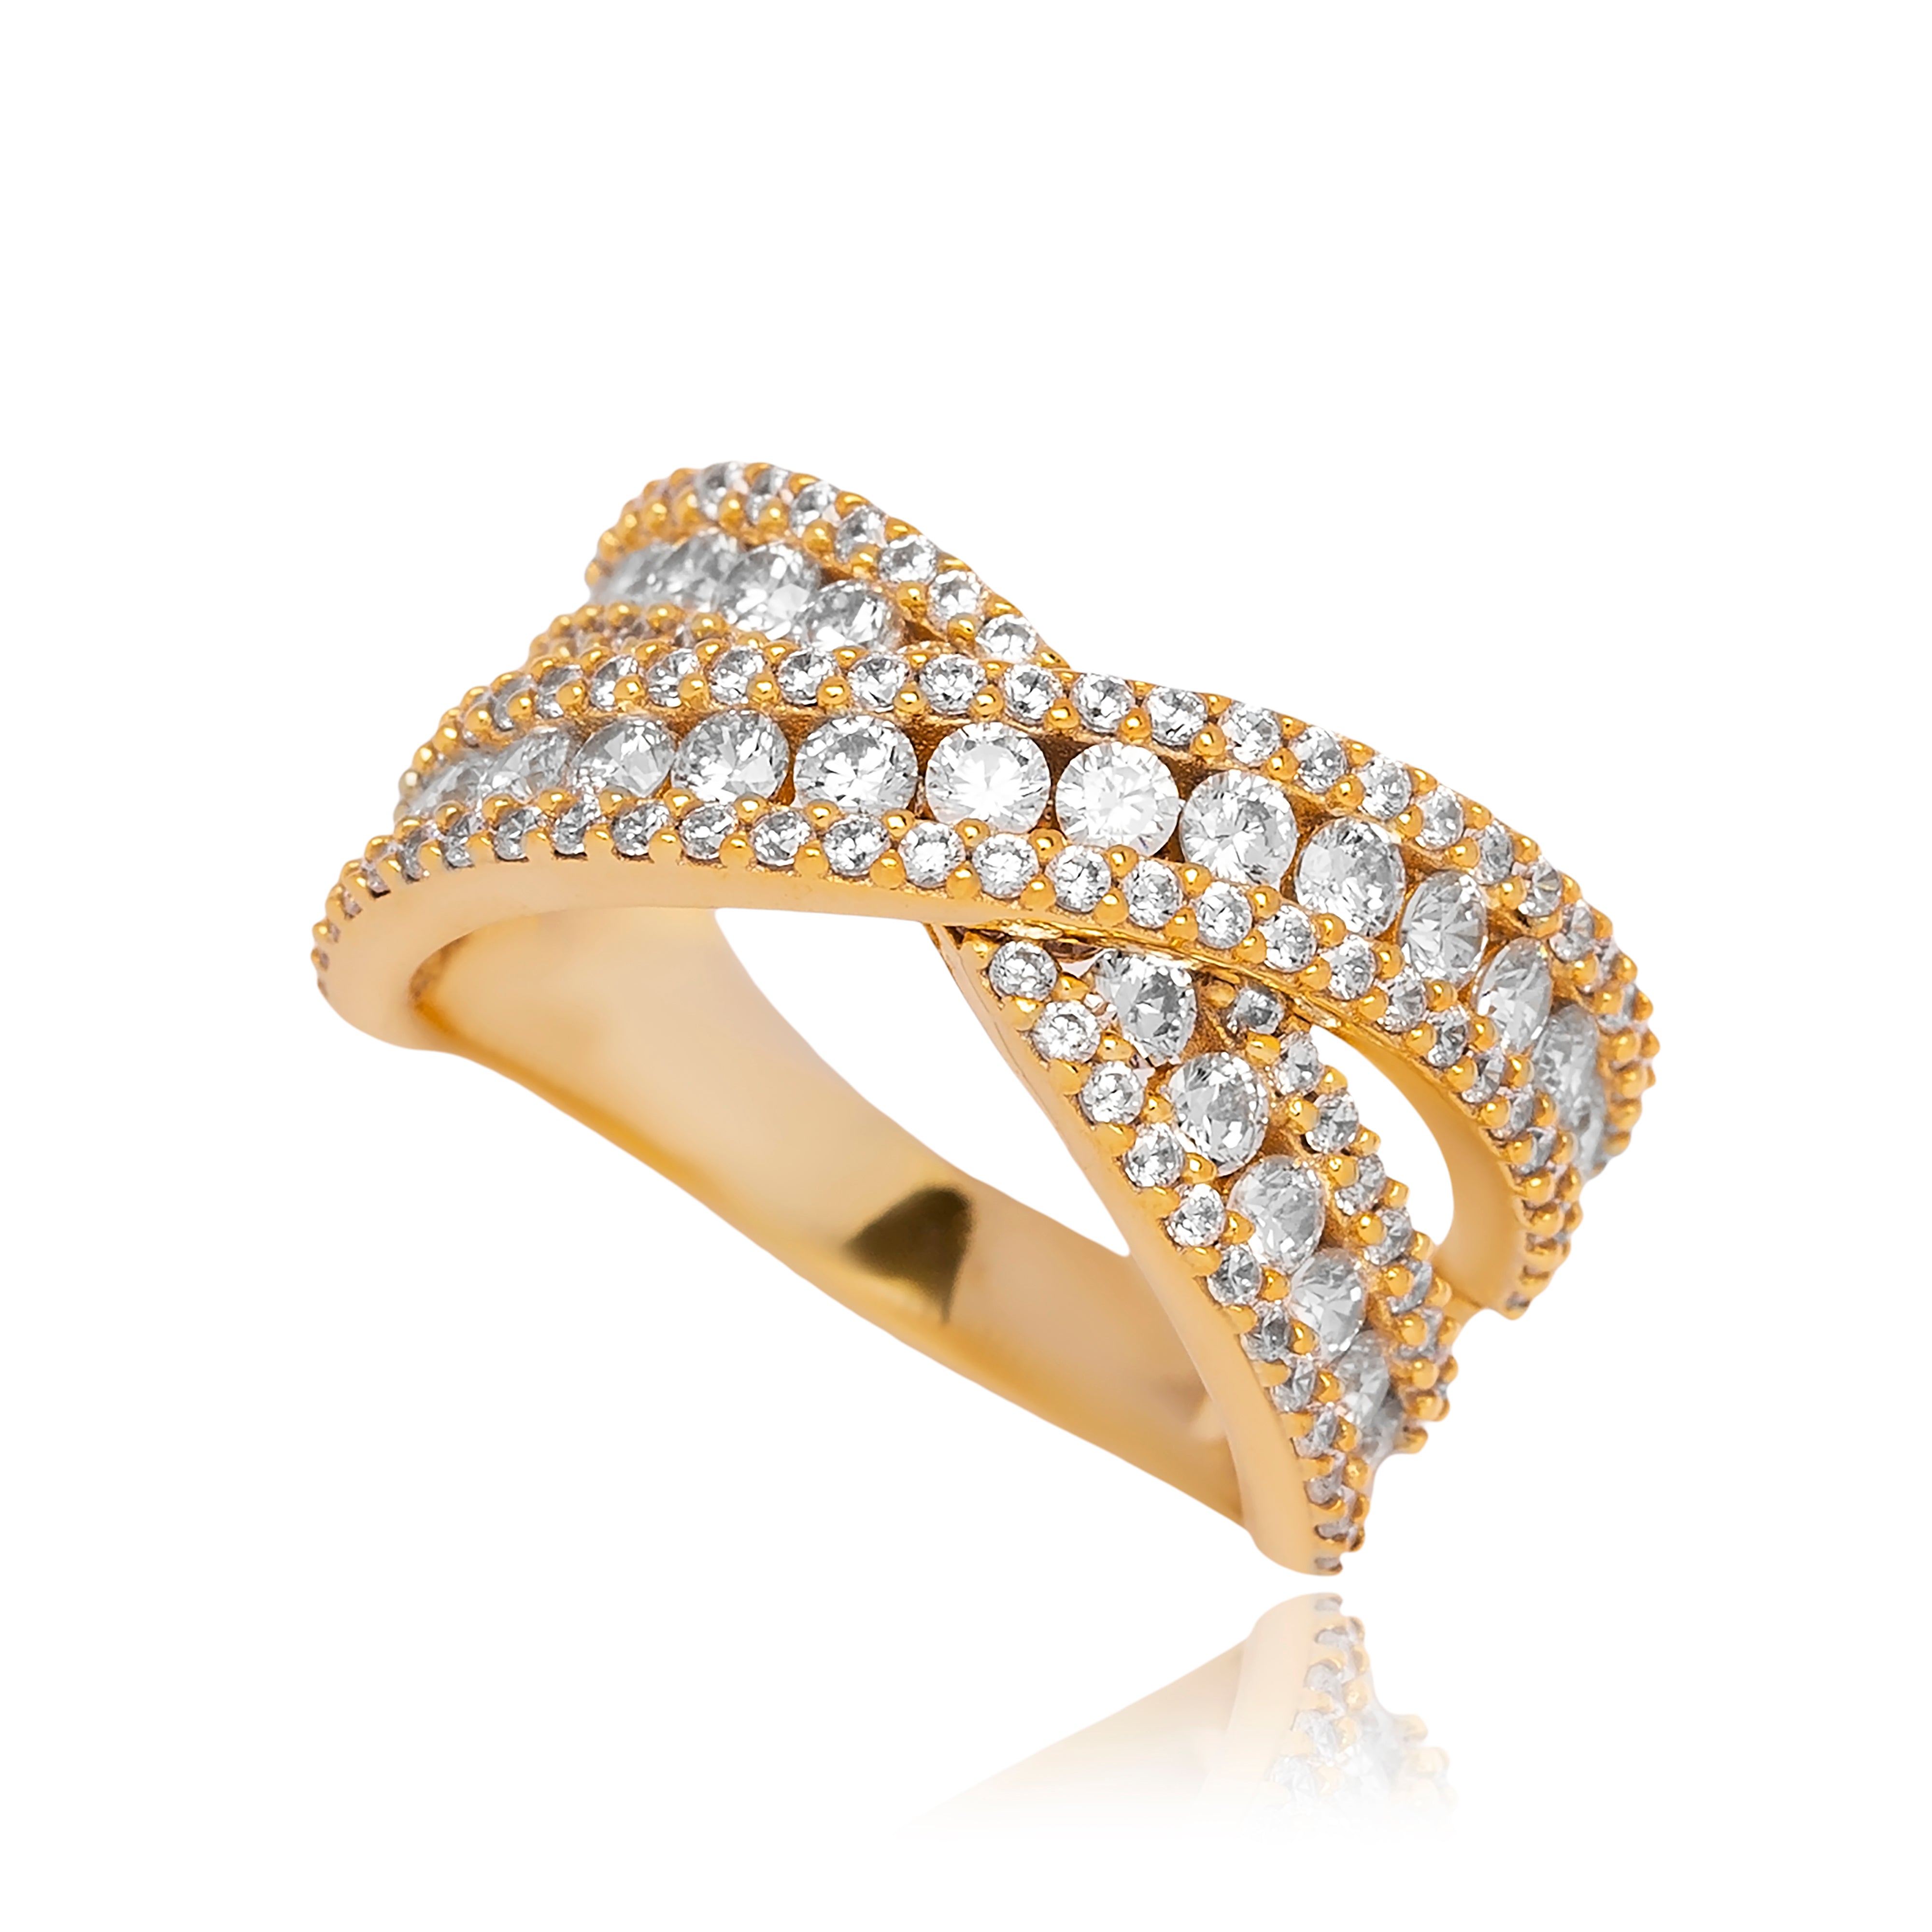 Elegant gold-tone ring adorned with sparkling cluster of cubic zirconia stones, perfect for evening events and black-tie occasions.